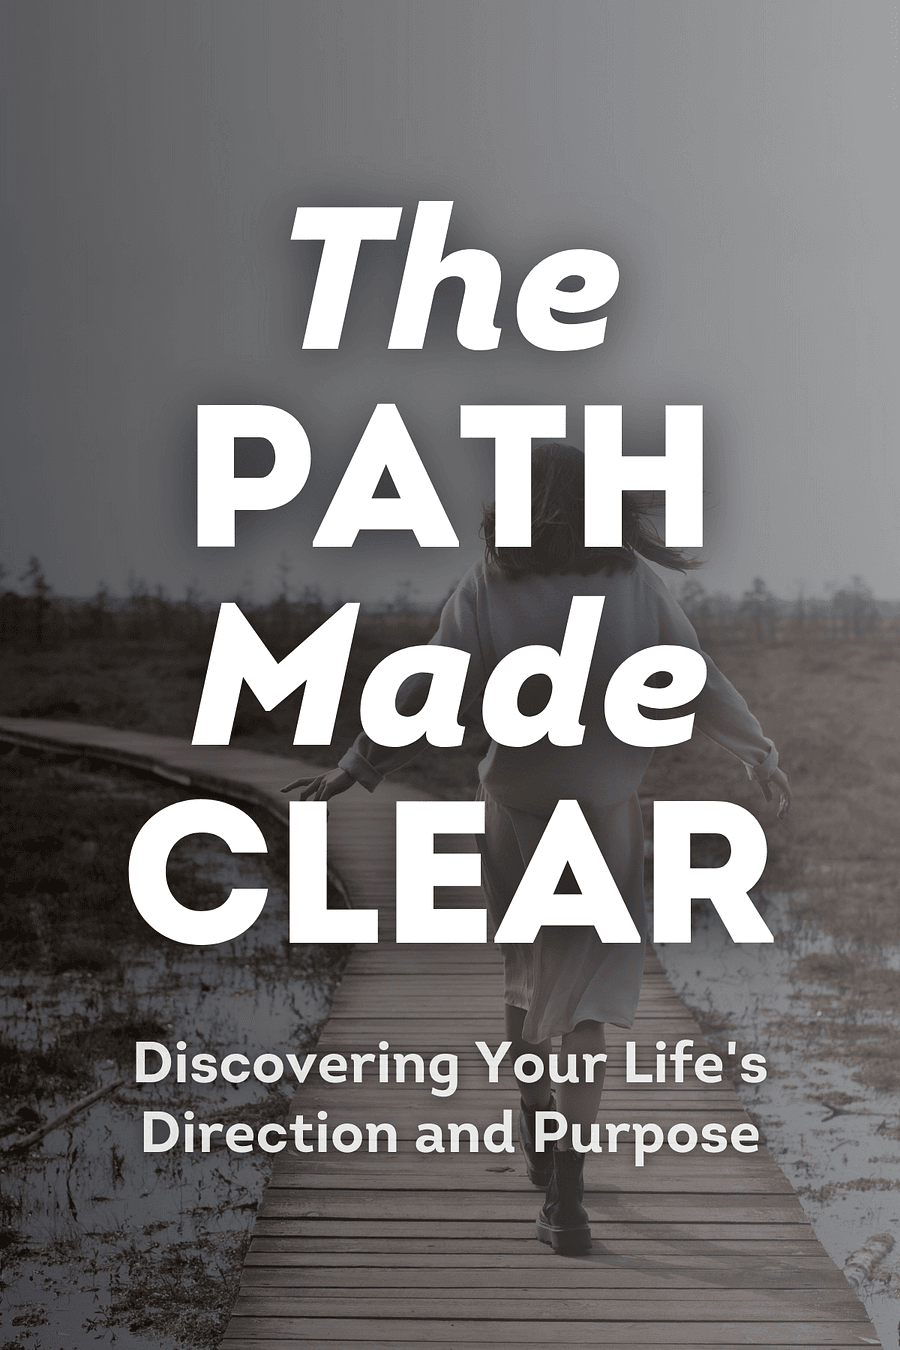 The Path Made Clear by Oprah Winfrey - Book Summary